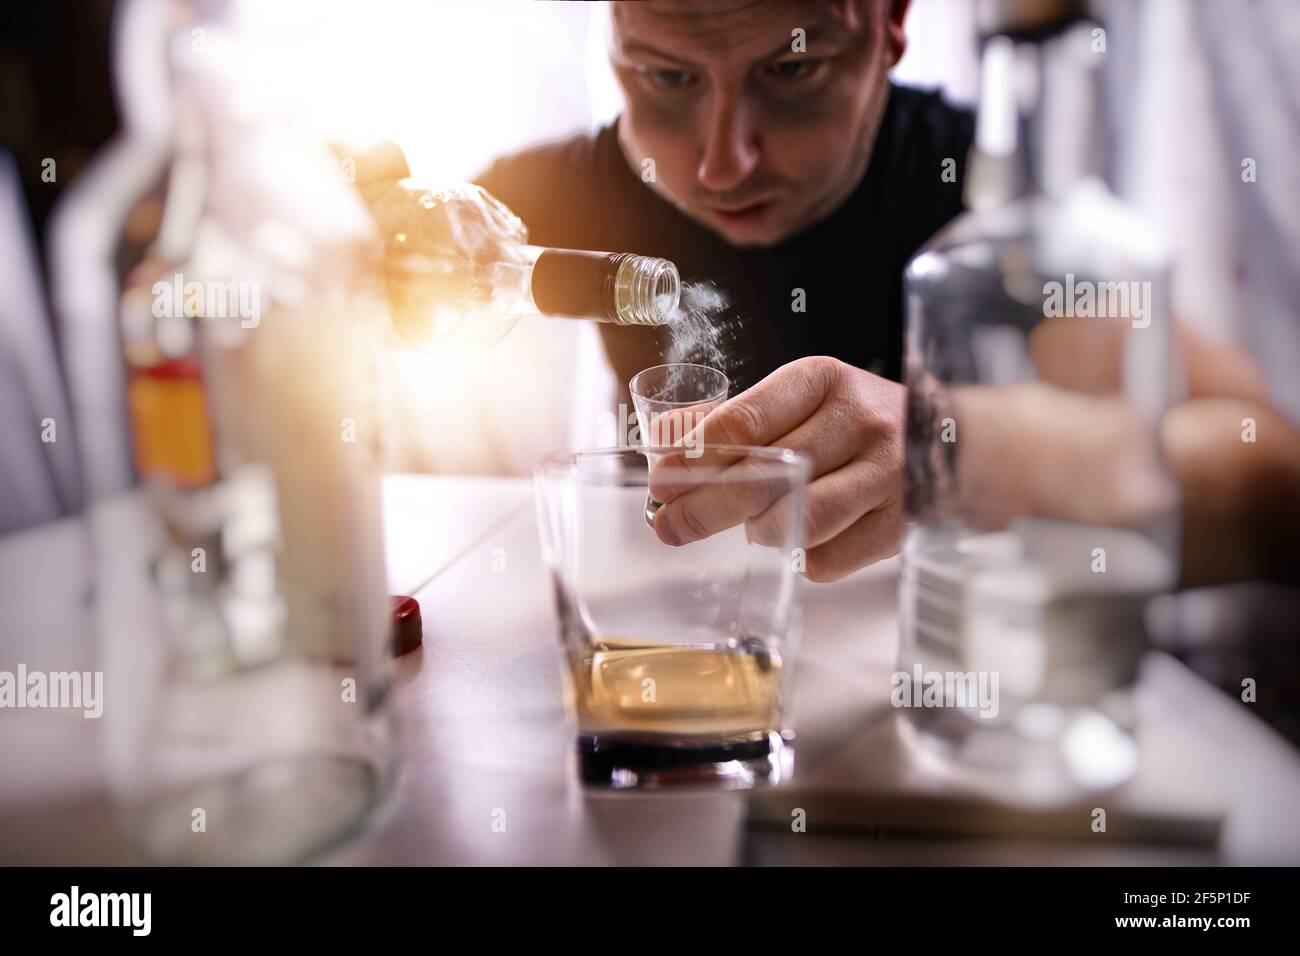 man with an alcohol problem drinks alcohol alone in a den Stock Photo